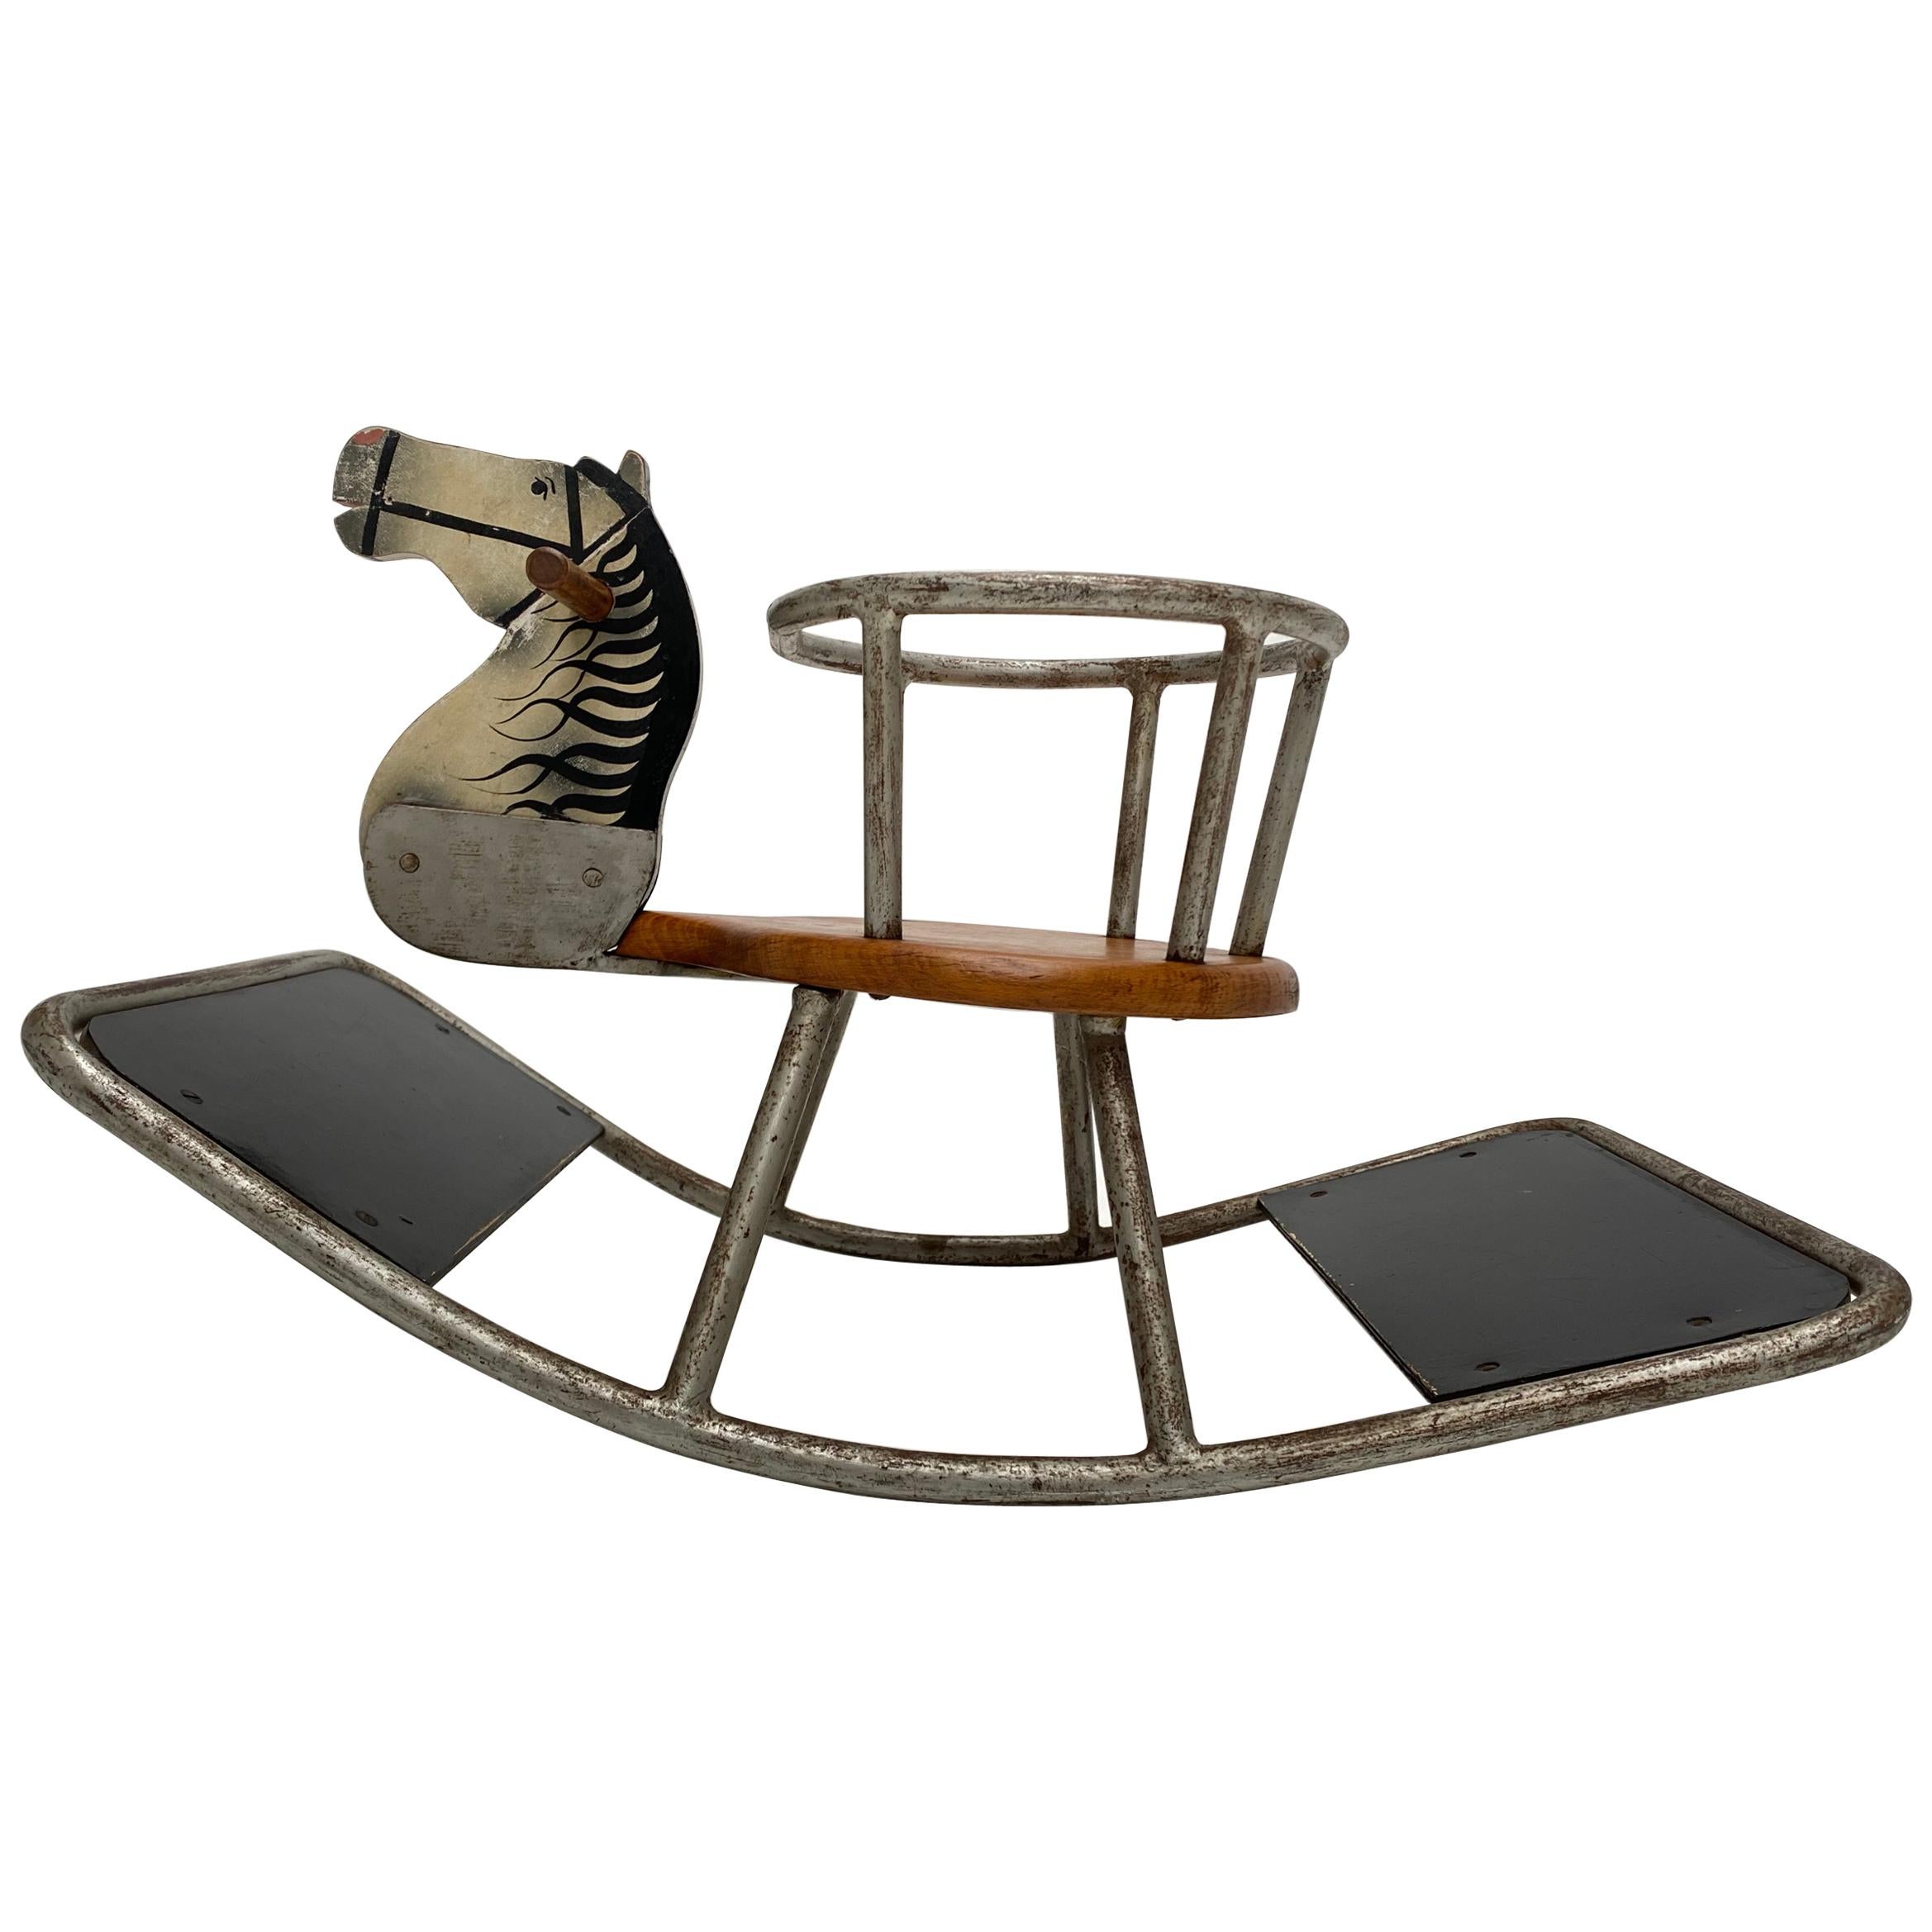 Bauhaus Style Rocking Horse Solid Round Metal and Wood, The Netherlands